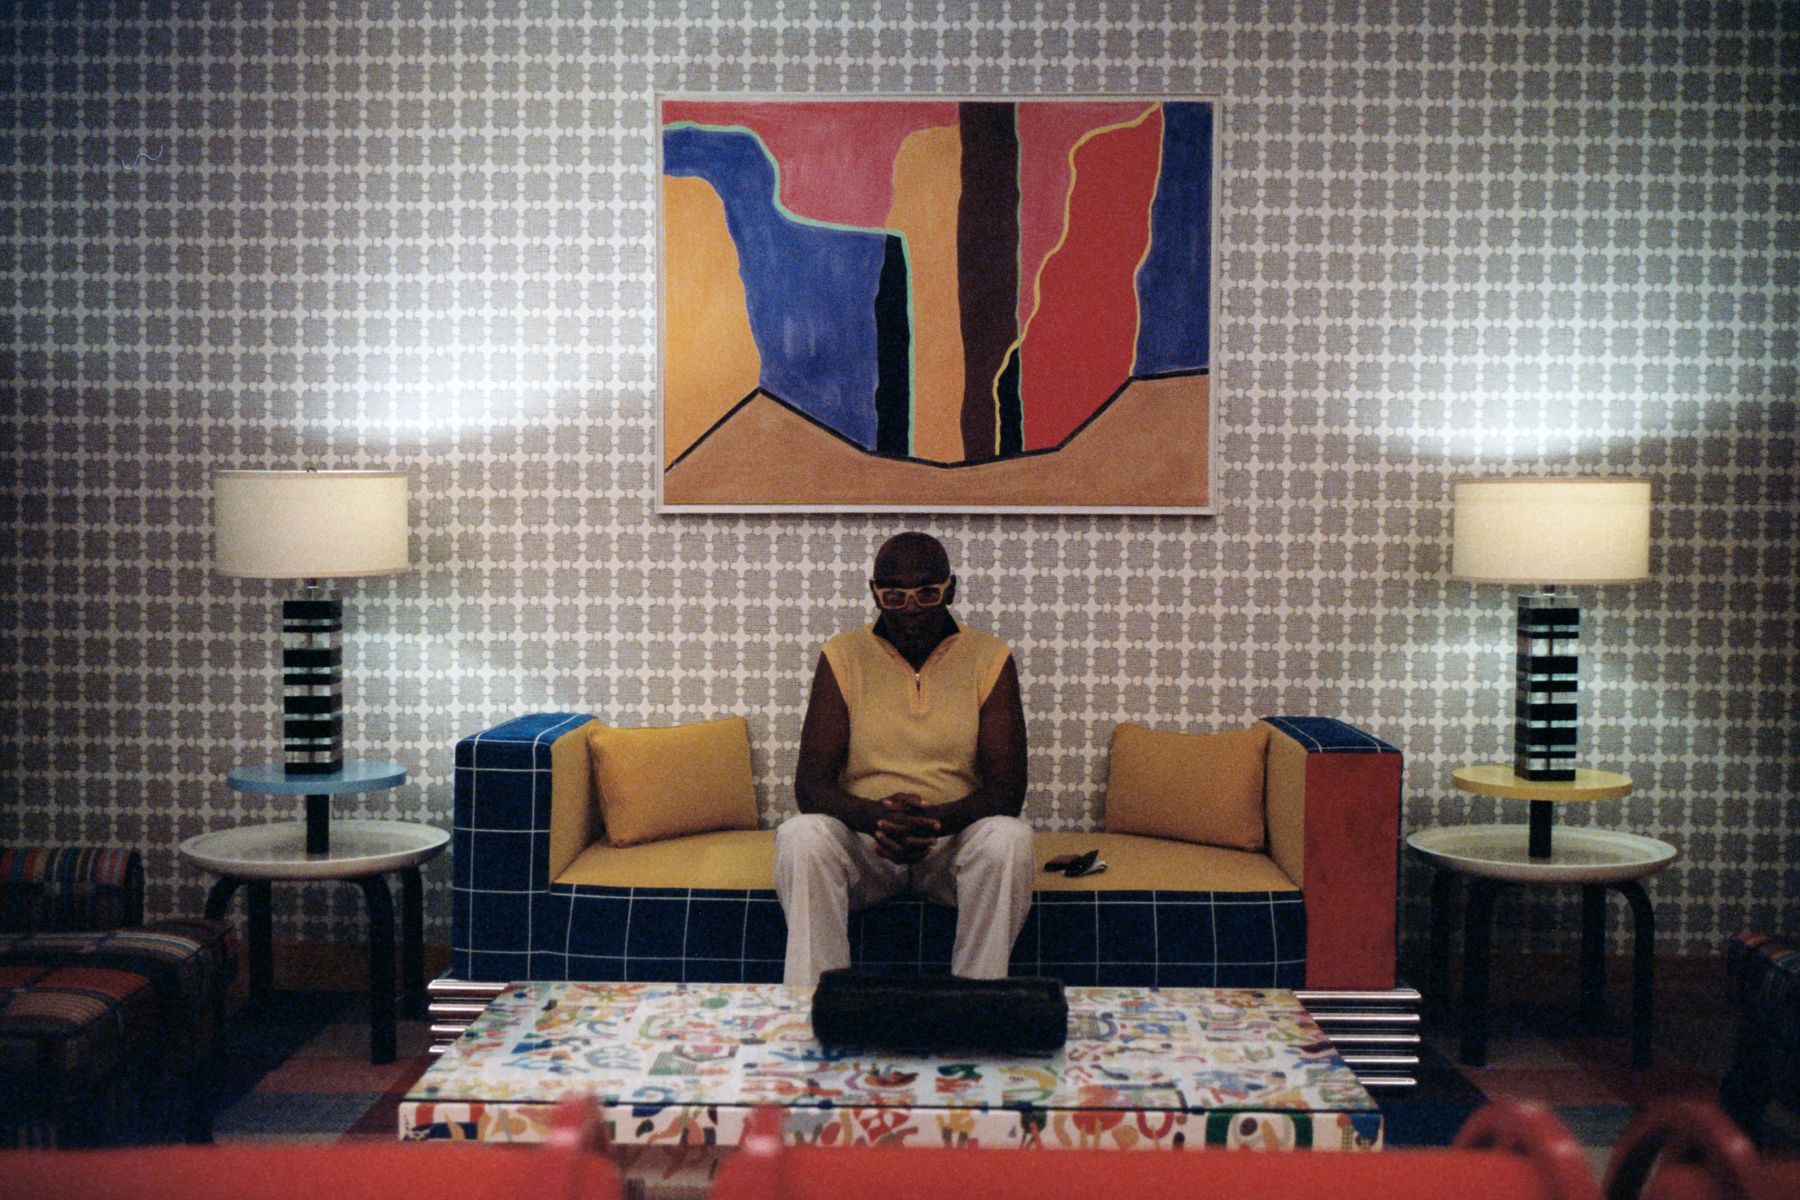 Person sitting on a couch in a retro room, with their hands to themselves. There is a big abstract artwork directly above them on the couch.